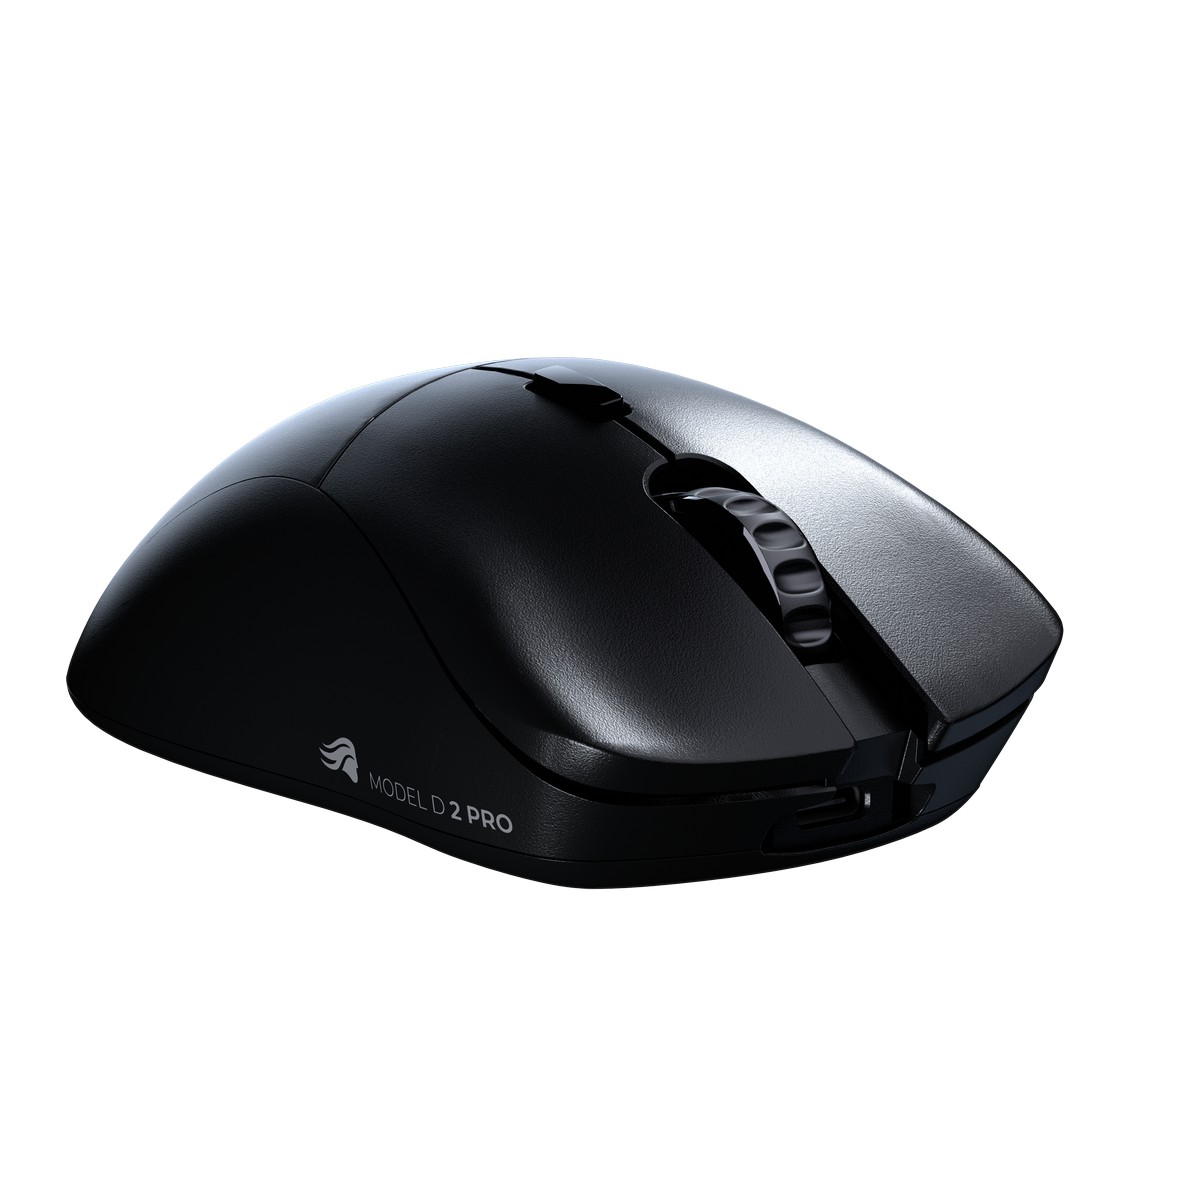 Glorious - Glorious Model D 2 PRO 1K Polling Wireless RGB Gaming Mouse - Black